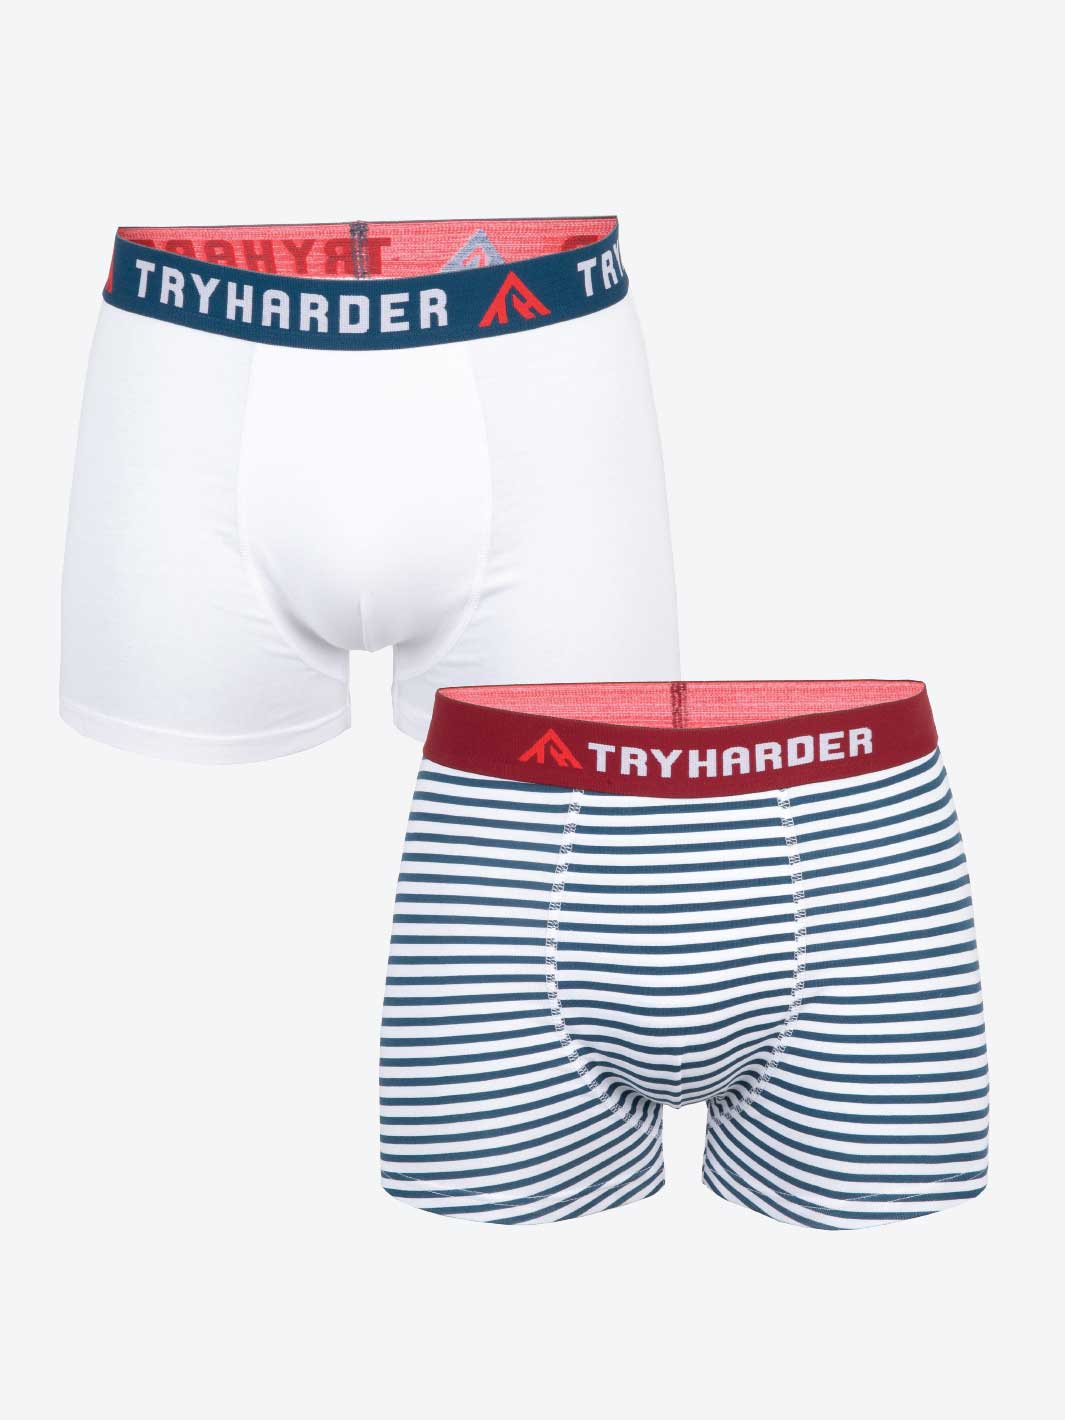 TRYHARDER - Boxer - White 2 pack